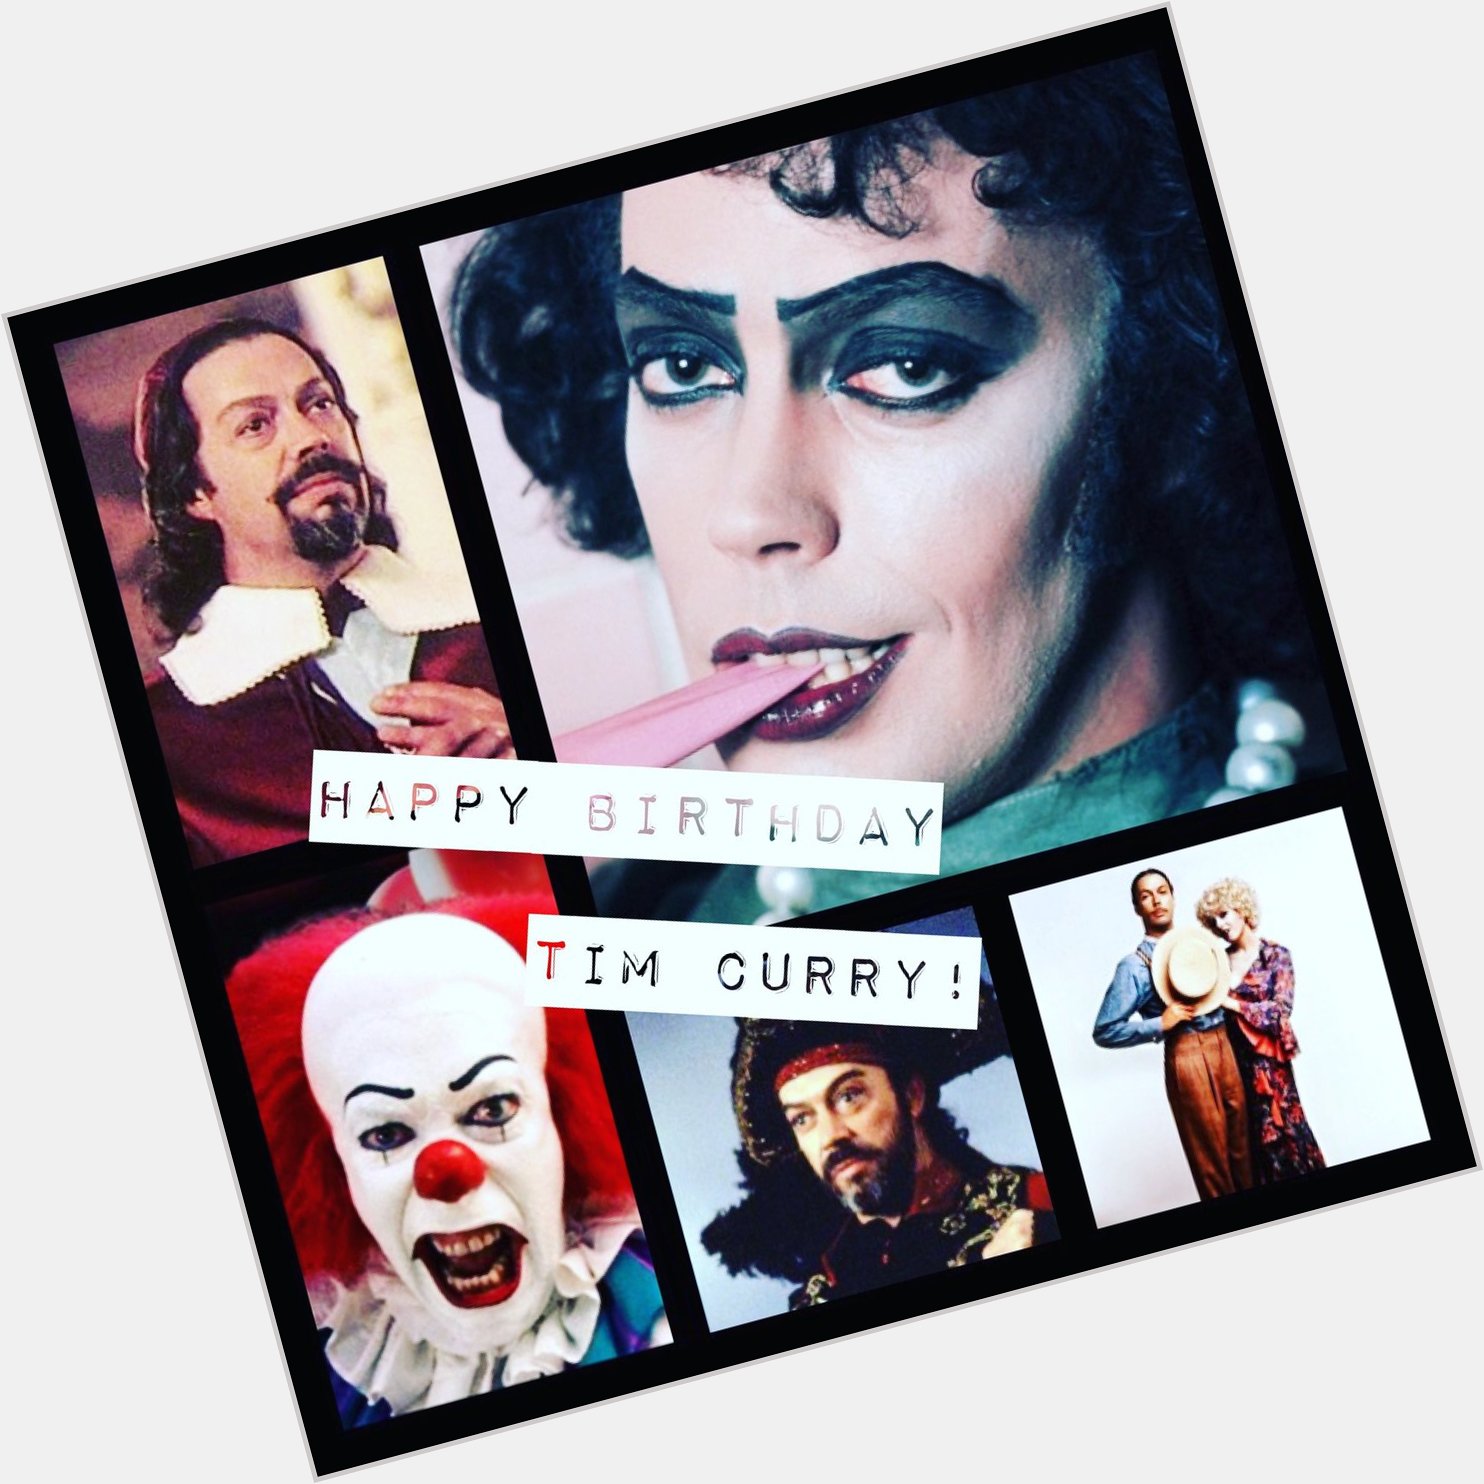 Happy Birthday TIM CURRY.

The answer to so many of lifes moments. 